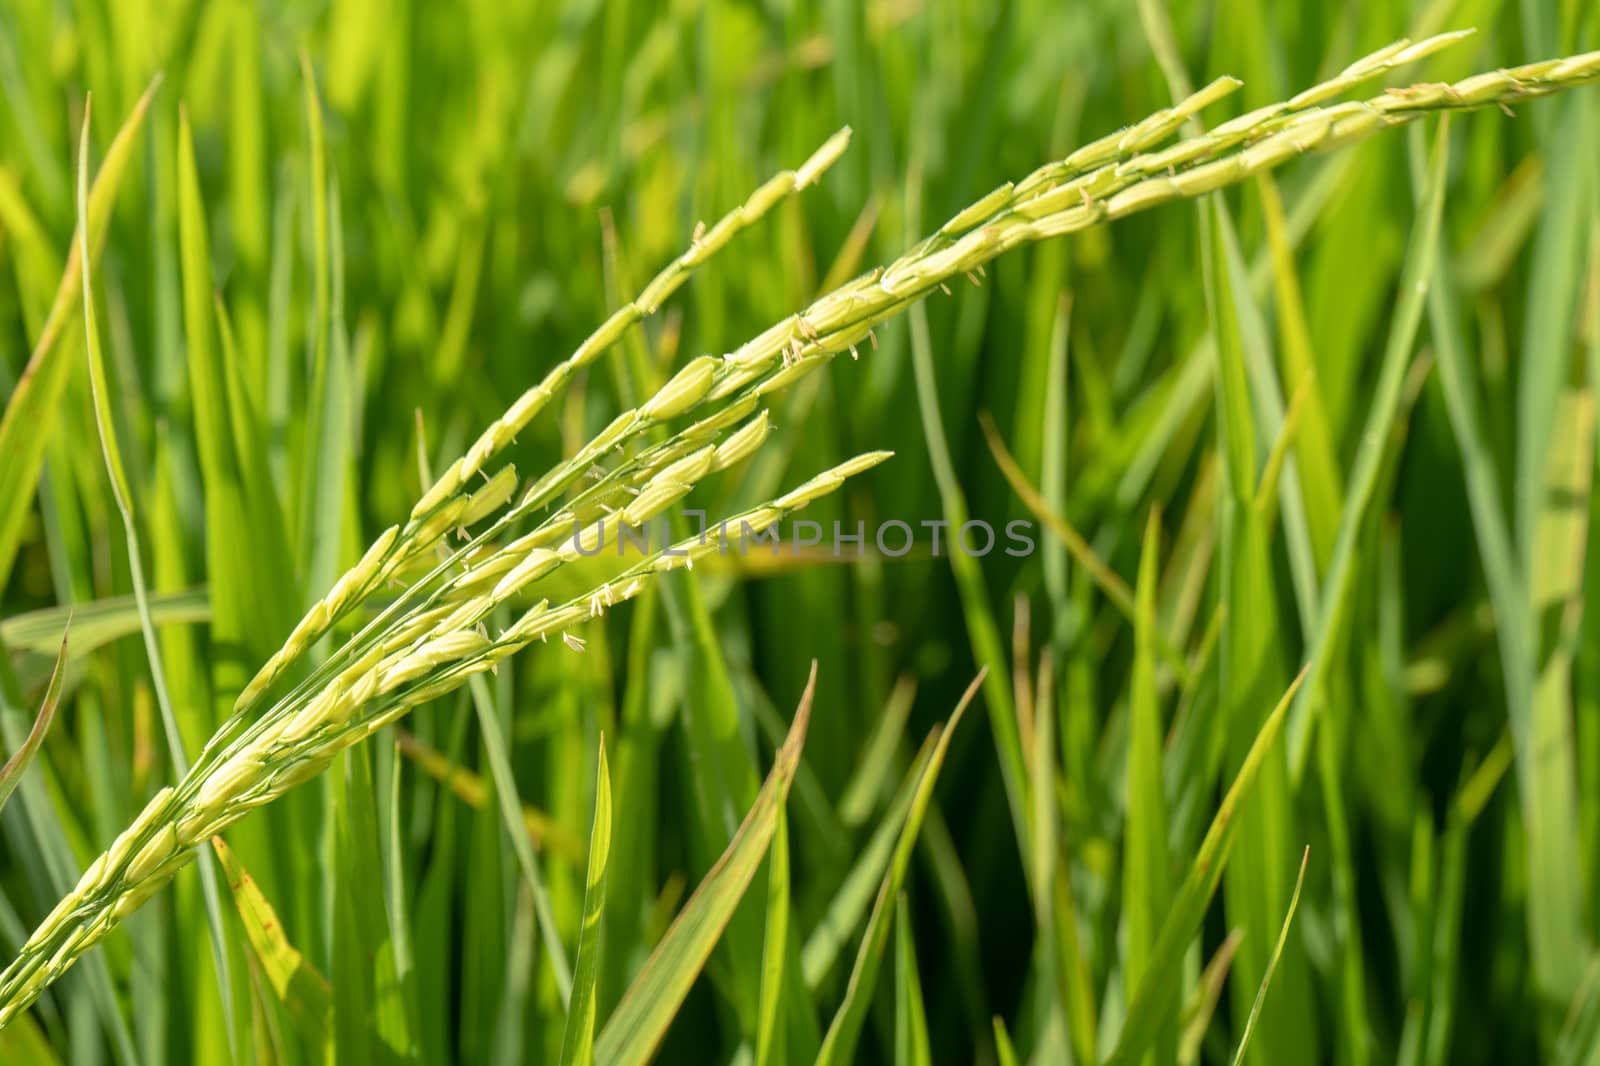 Paddy rice plant close up view.